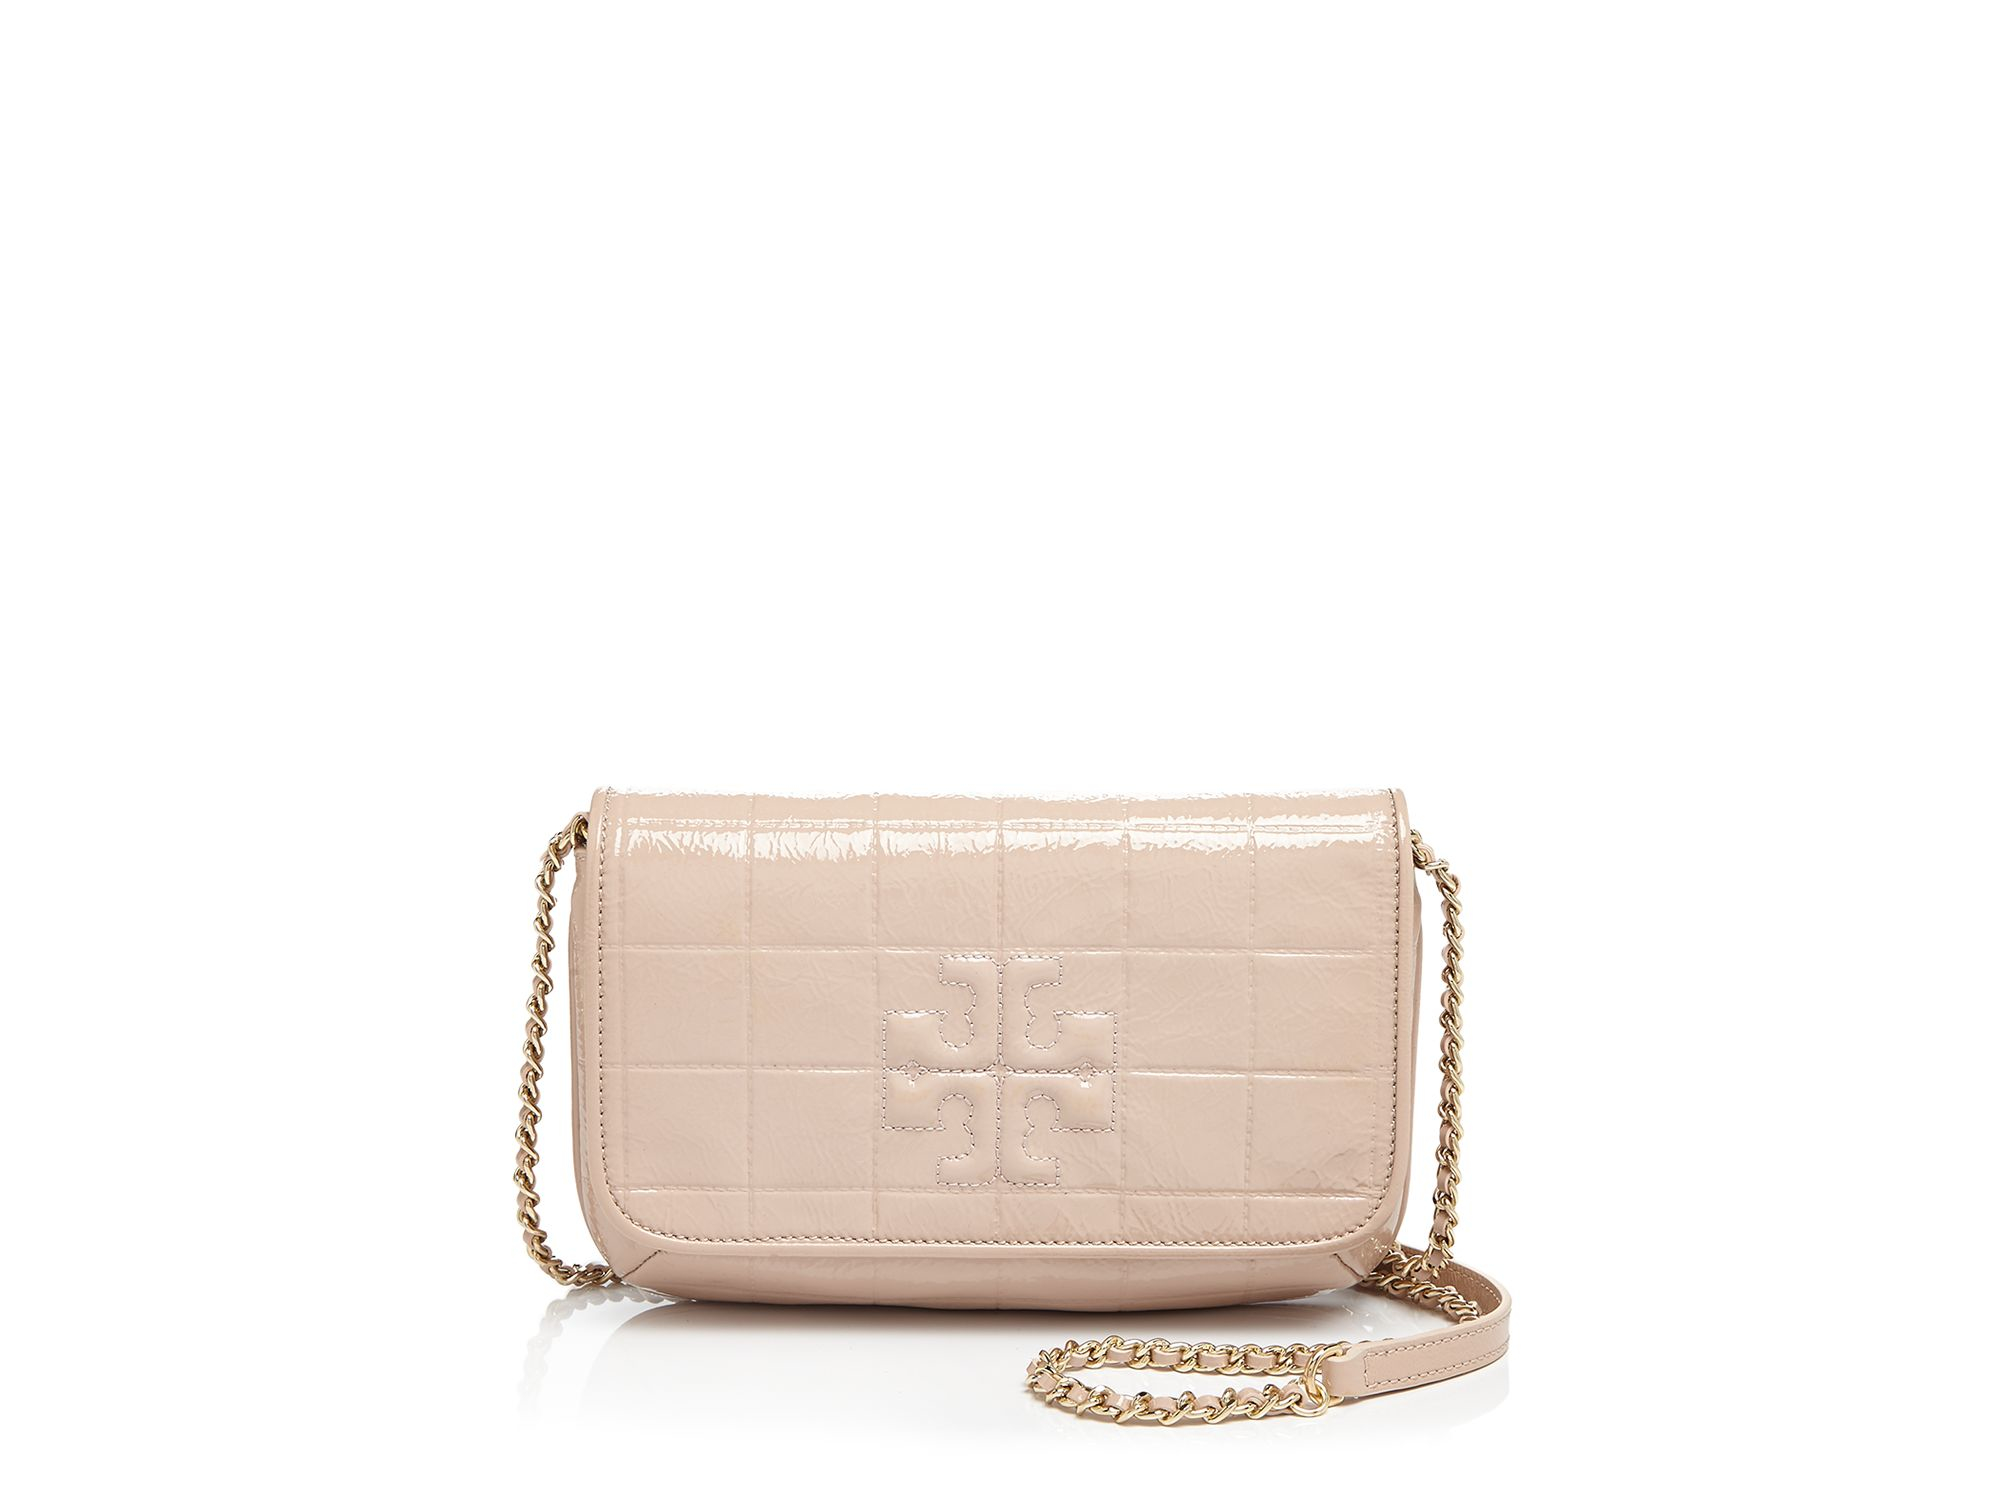 Lyst - Tory Burch Marion Quilted Patent Clutch in Natural